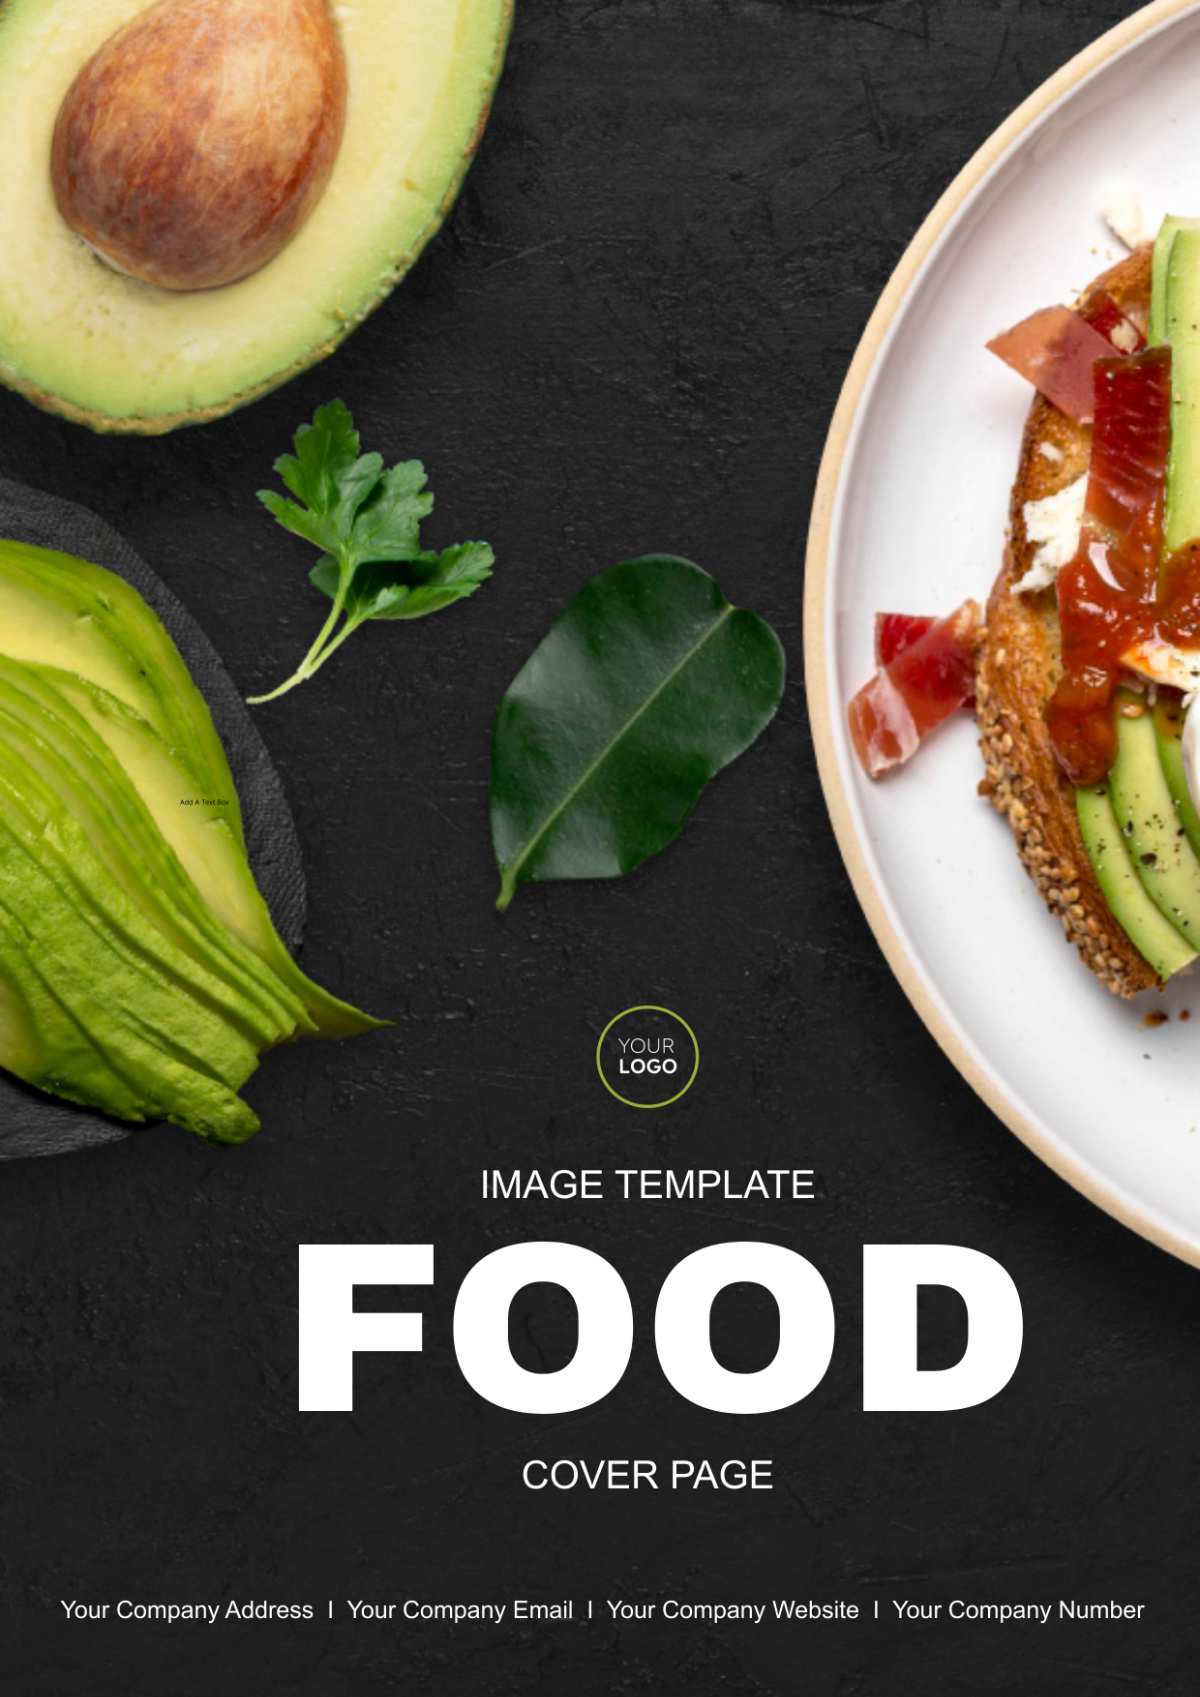 Food Cover Page Image